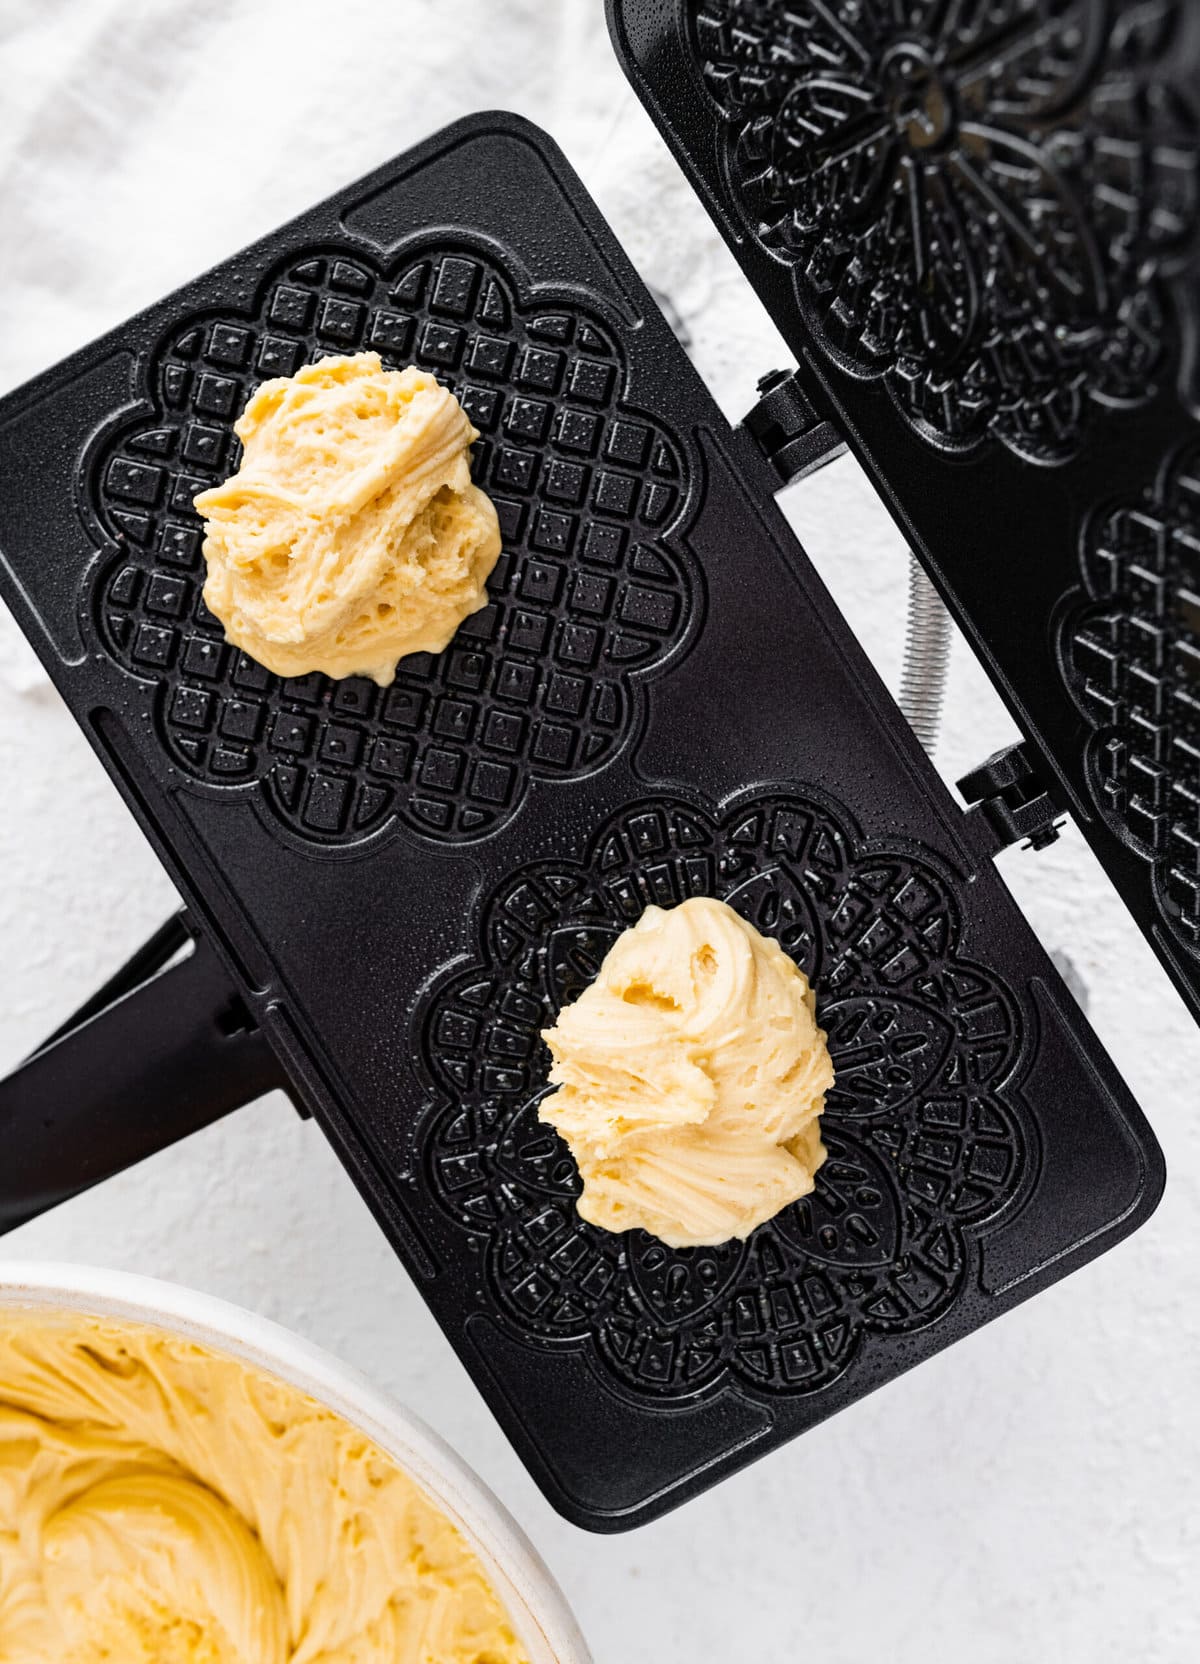 How to make best pizzelle cookie recipe step-by-step: batter on the hot griddle. ready to close and cook.